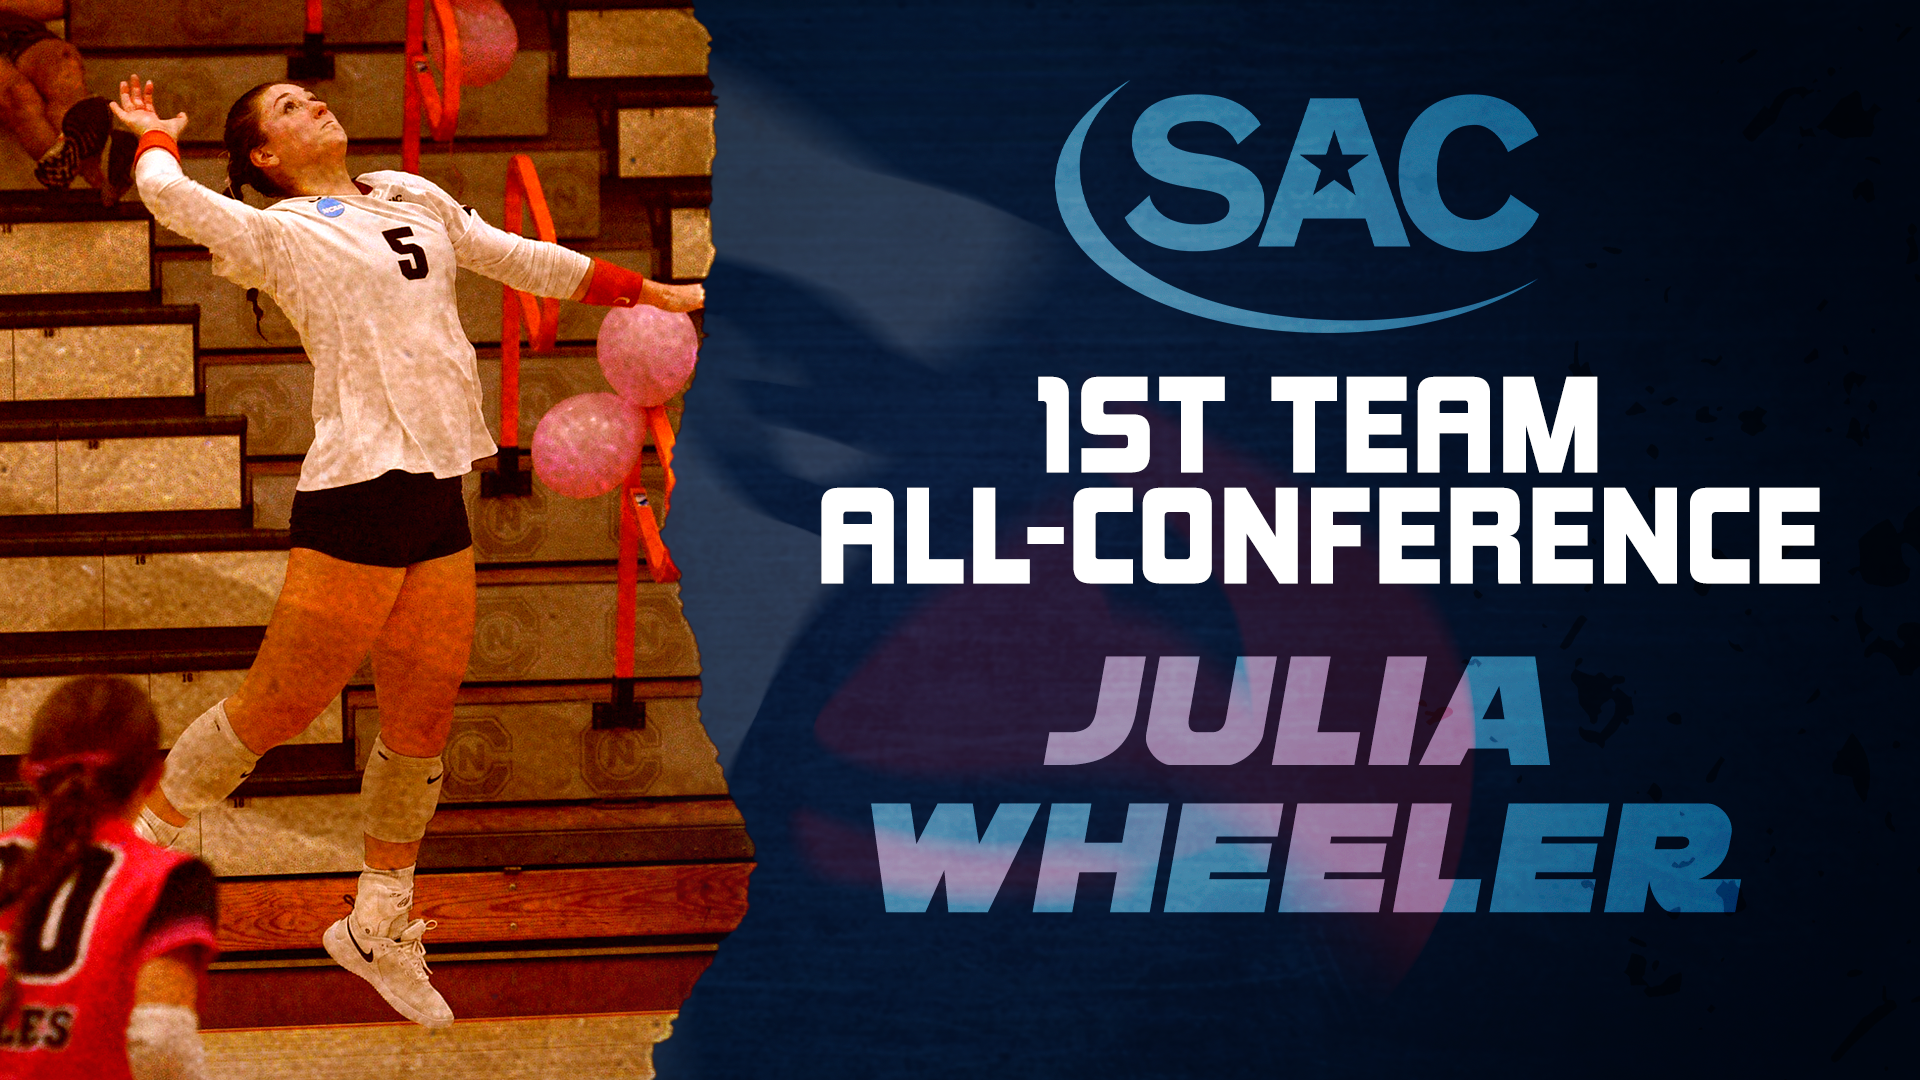 Wheeler leads the nation in attacks and receives all-conference nods.